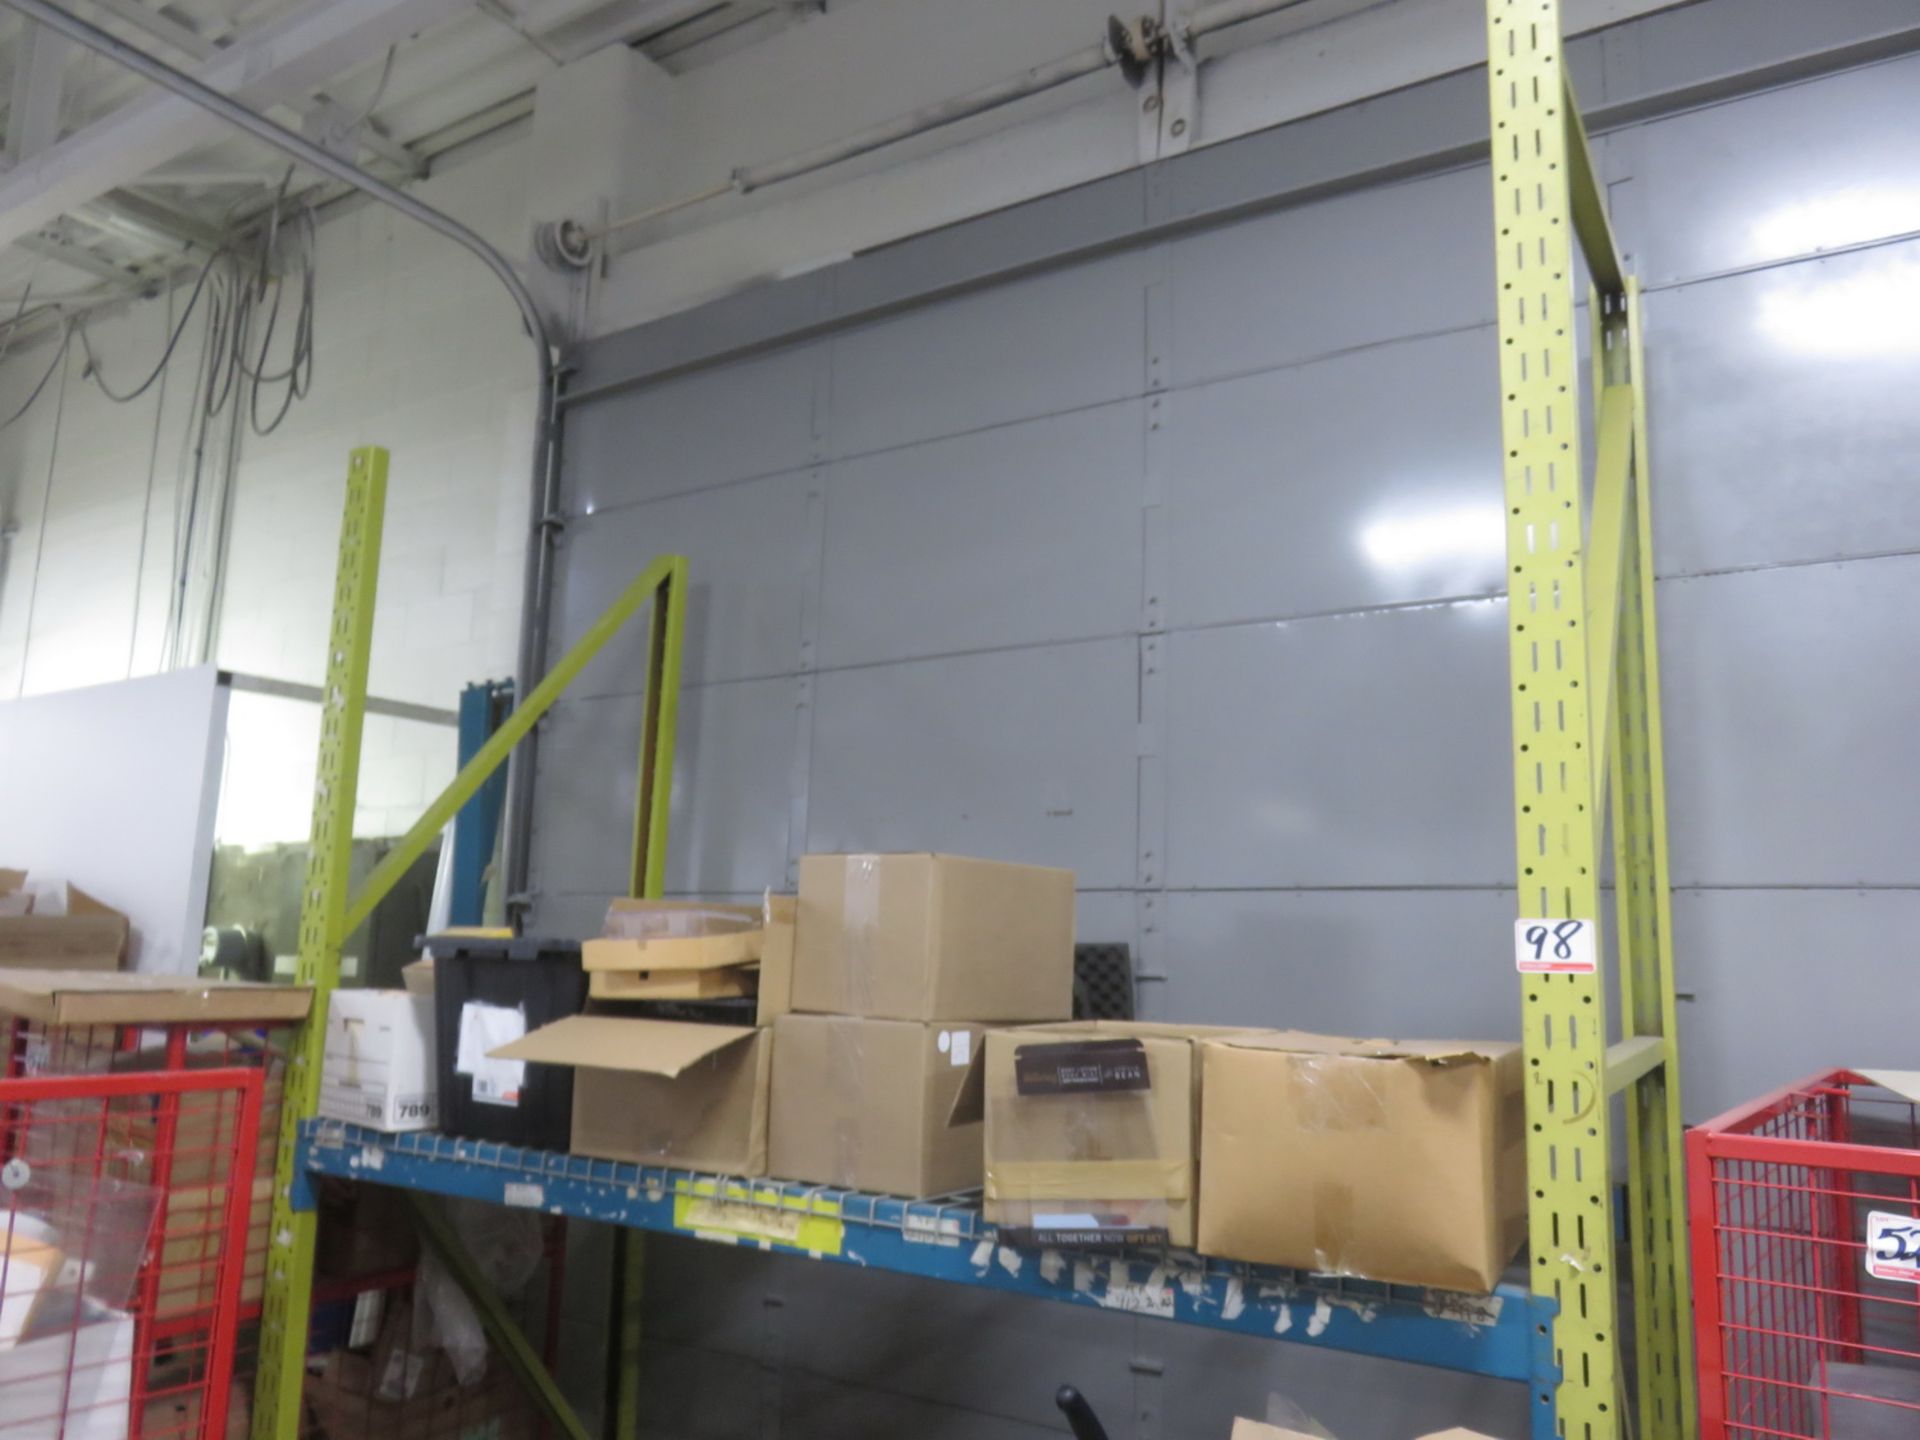 SECTIONS - TRIPLE A 42" X 8' X 10'H PALLET RACKING YELLOW/ BLUE 4 STRINGERS/ SECTION